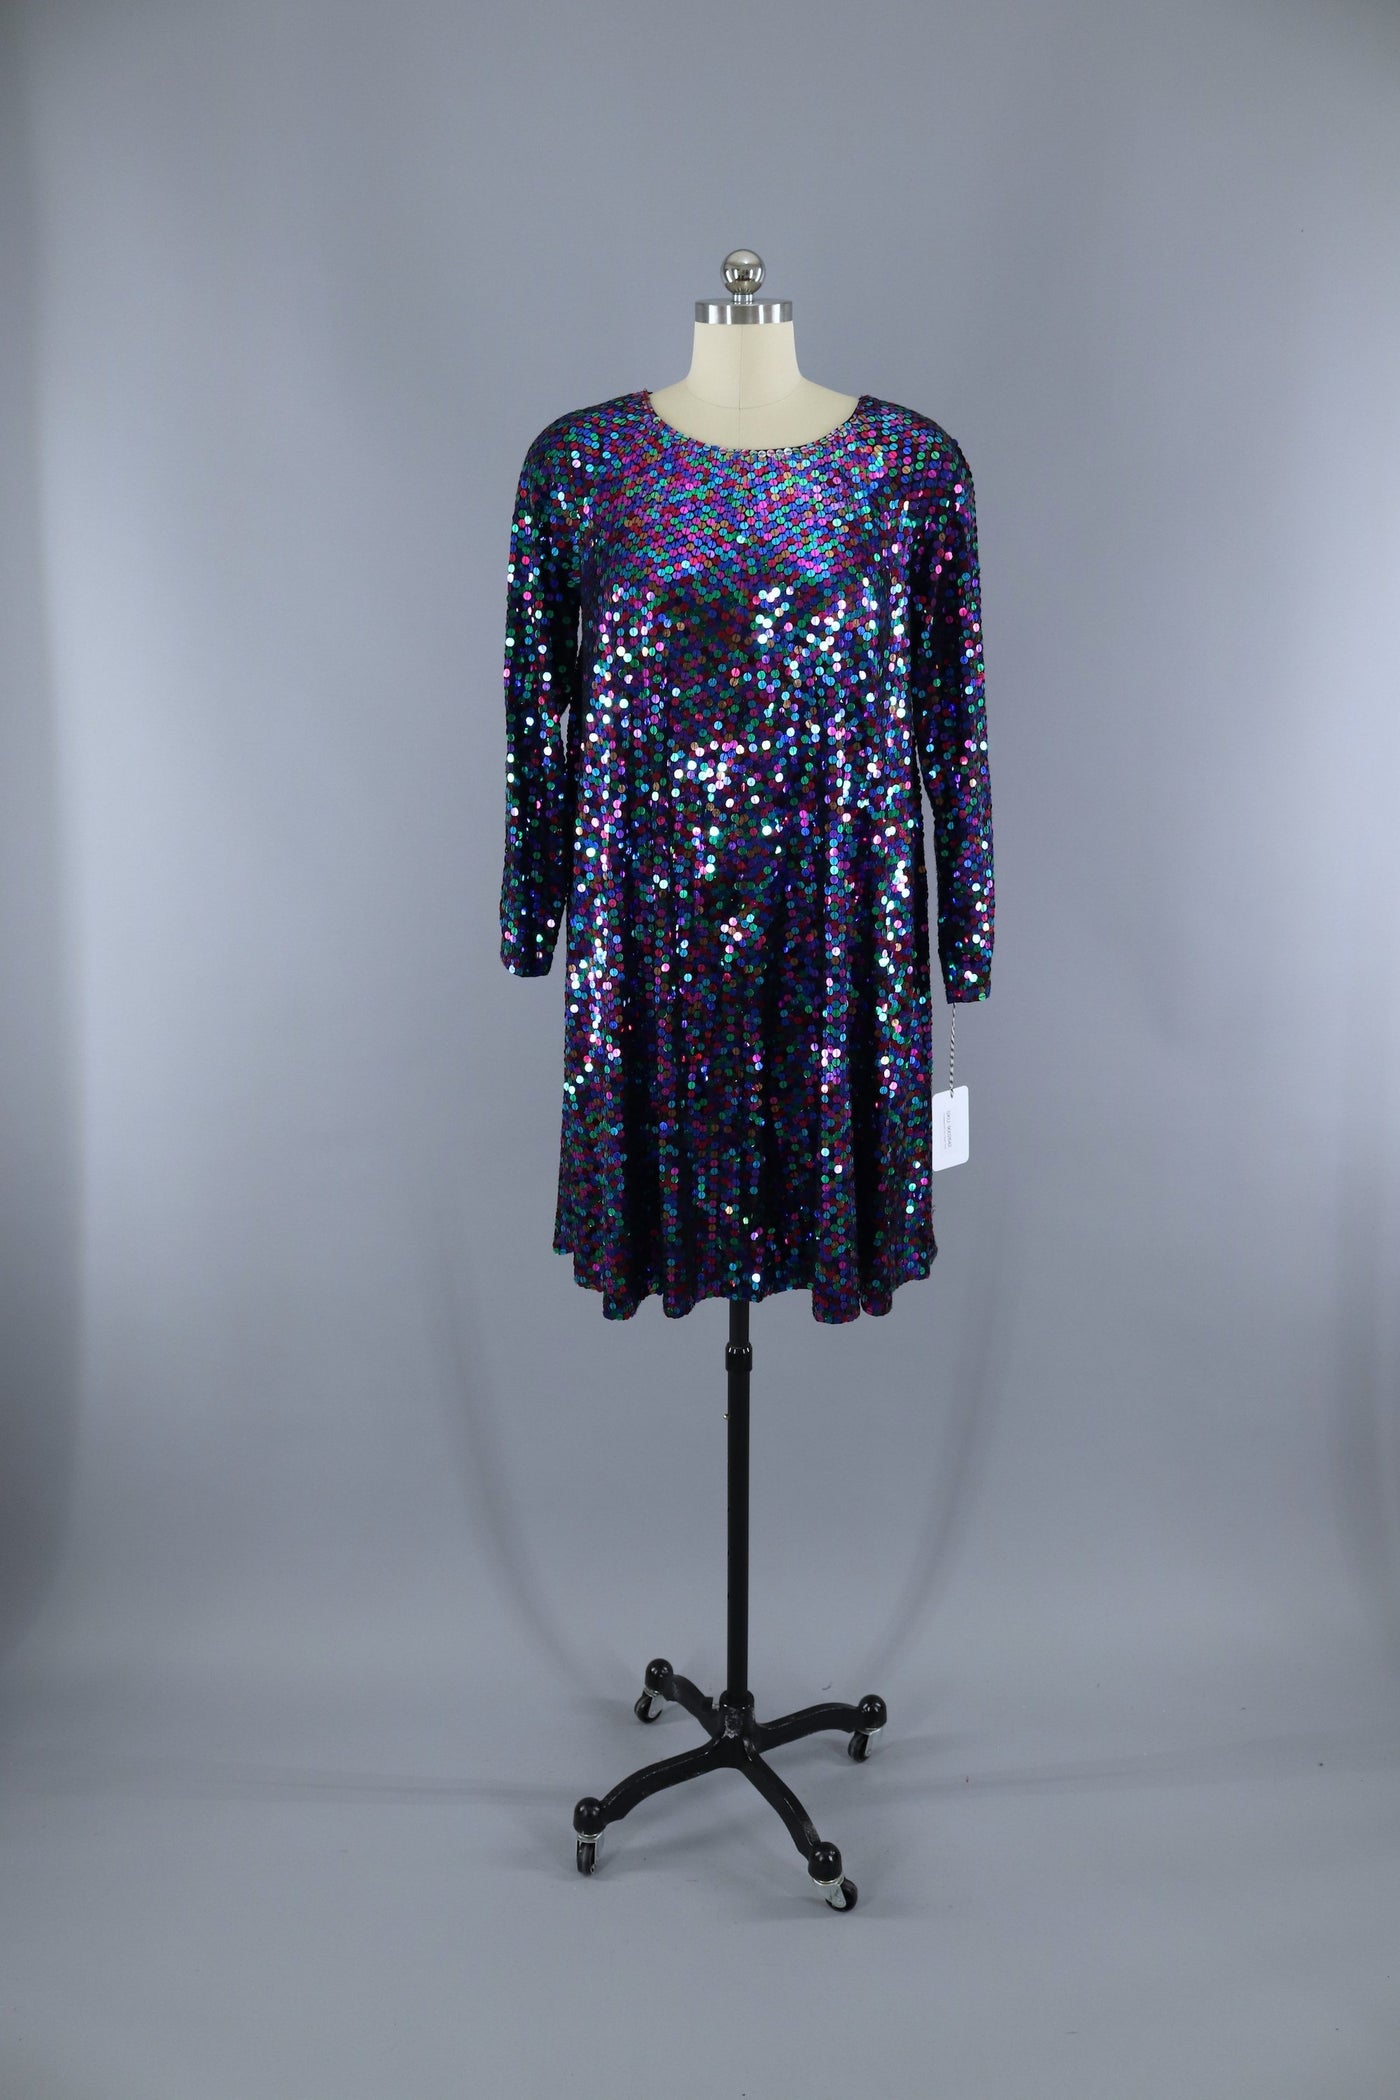 Vintage 1980s Rainbow Sequined Party Trophy Dress - ThisBlueBird